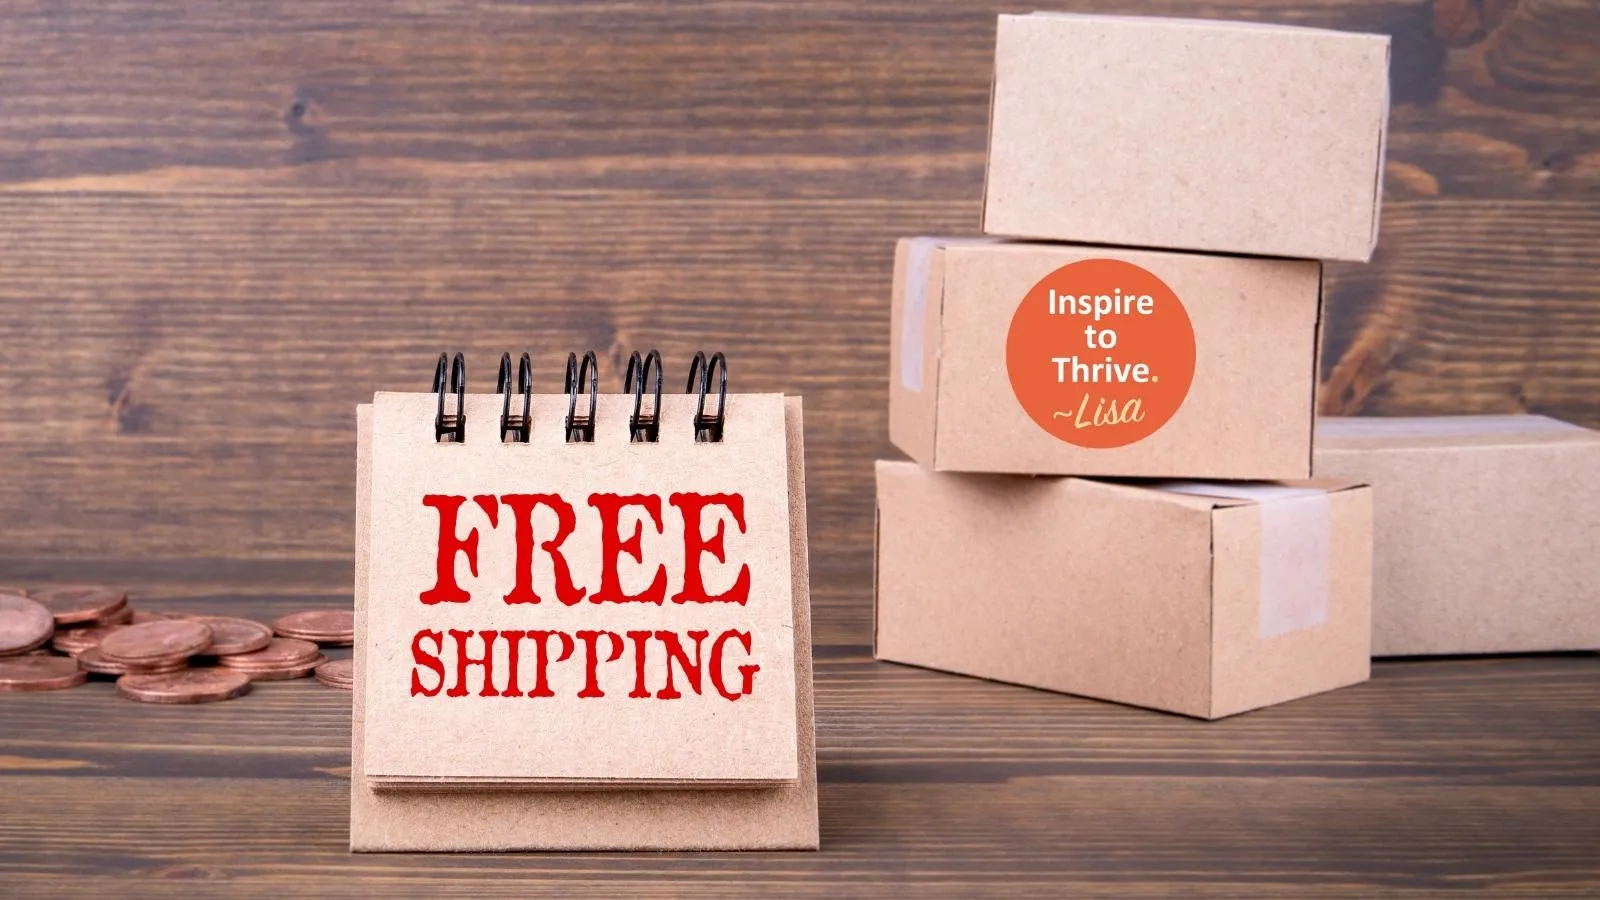 free shipping lead magnet ideas for an e-commerce store